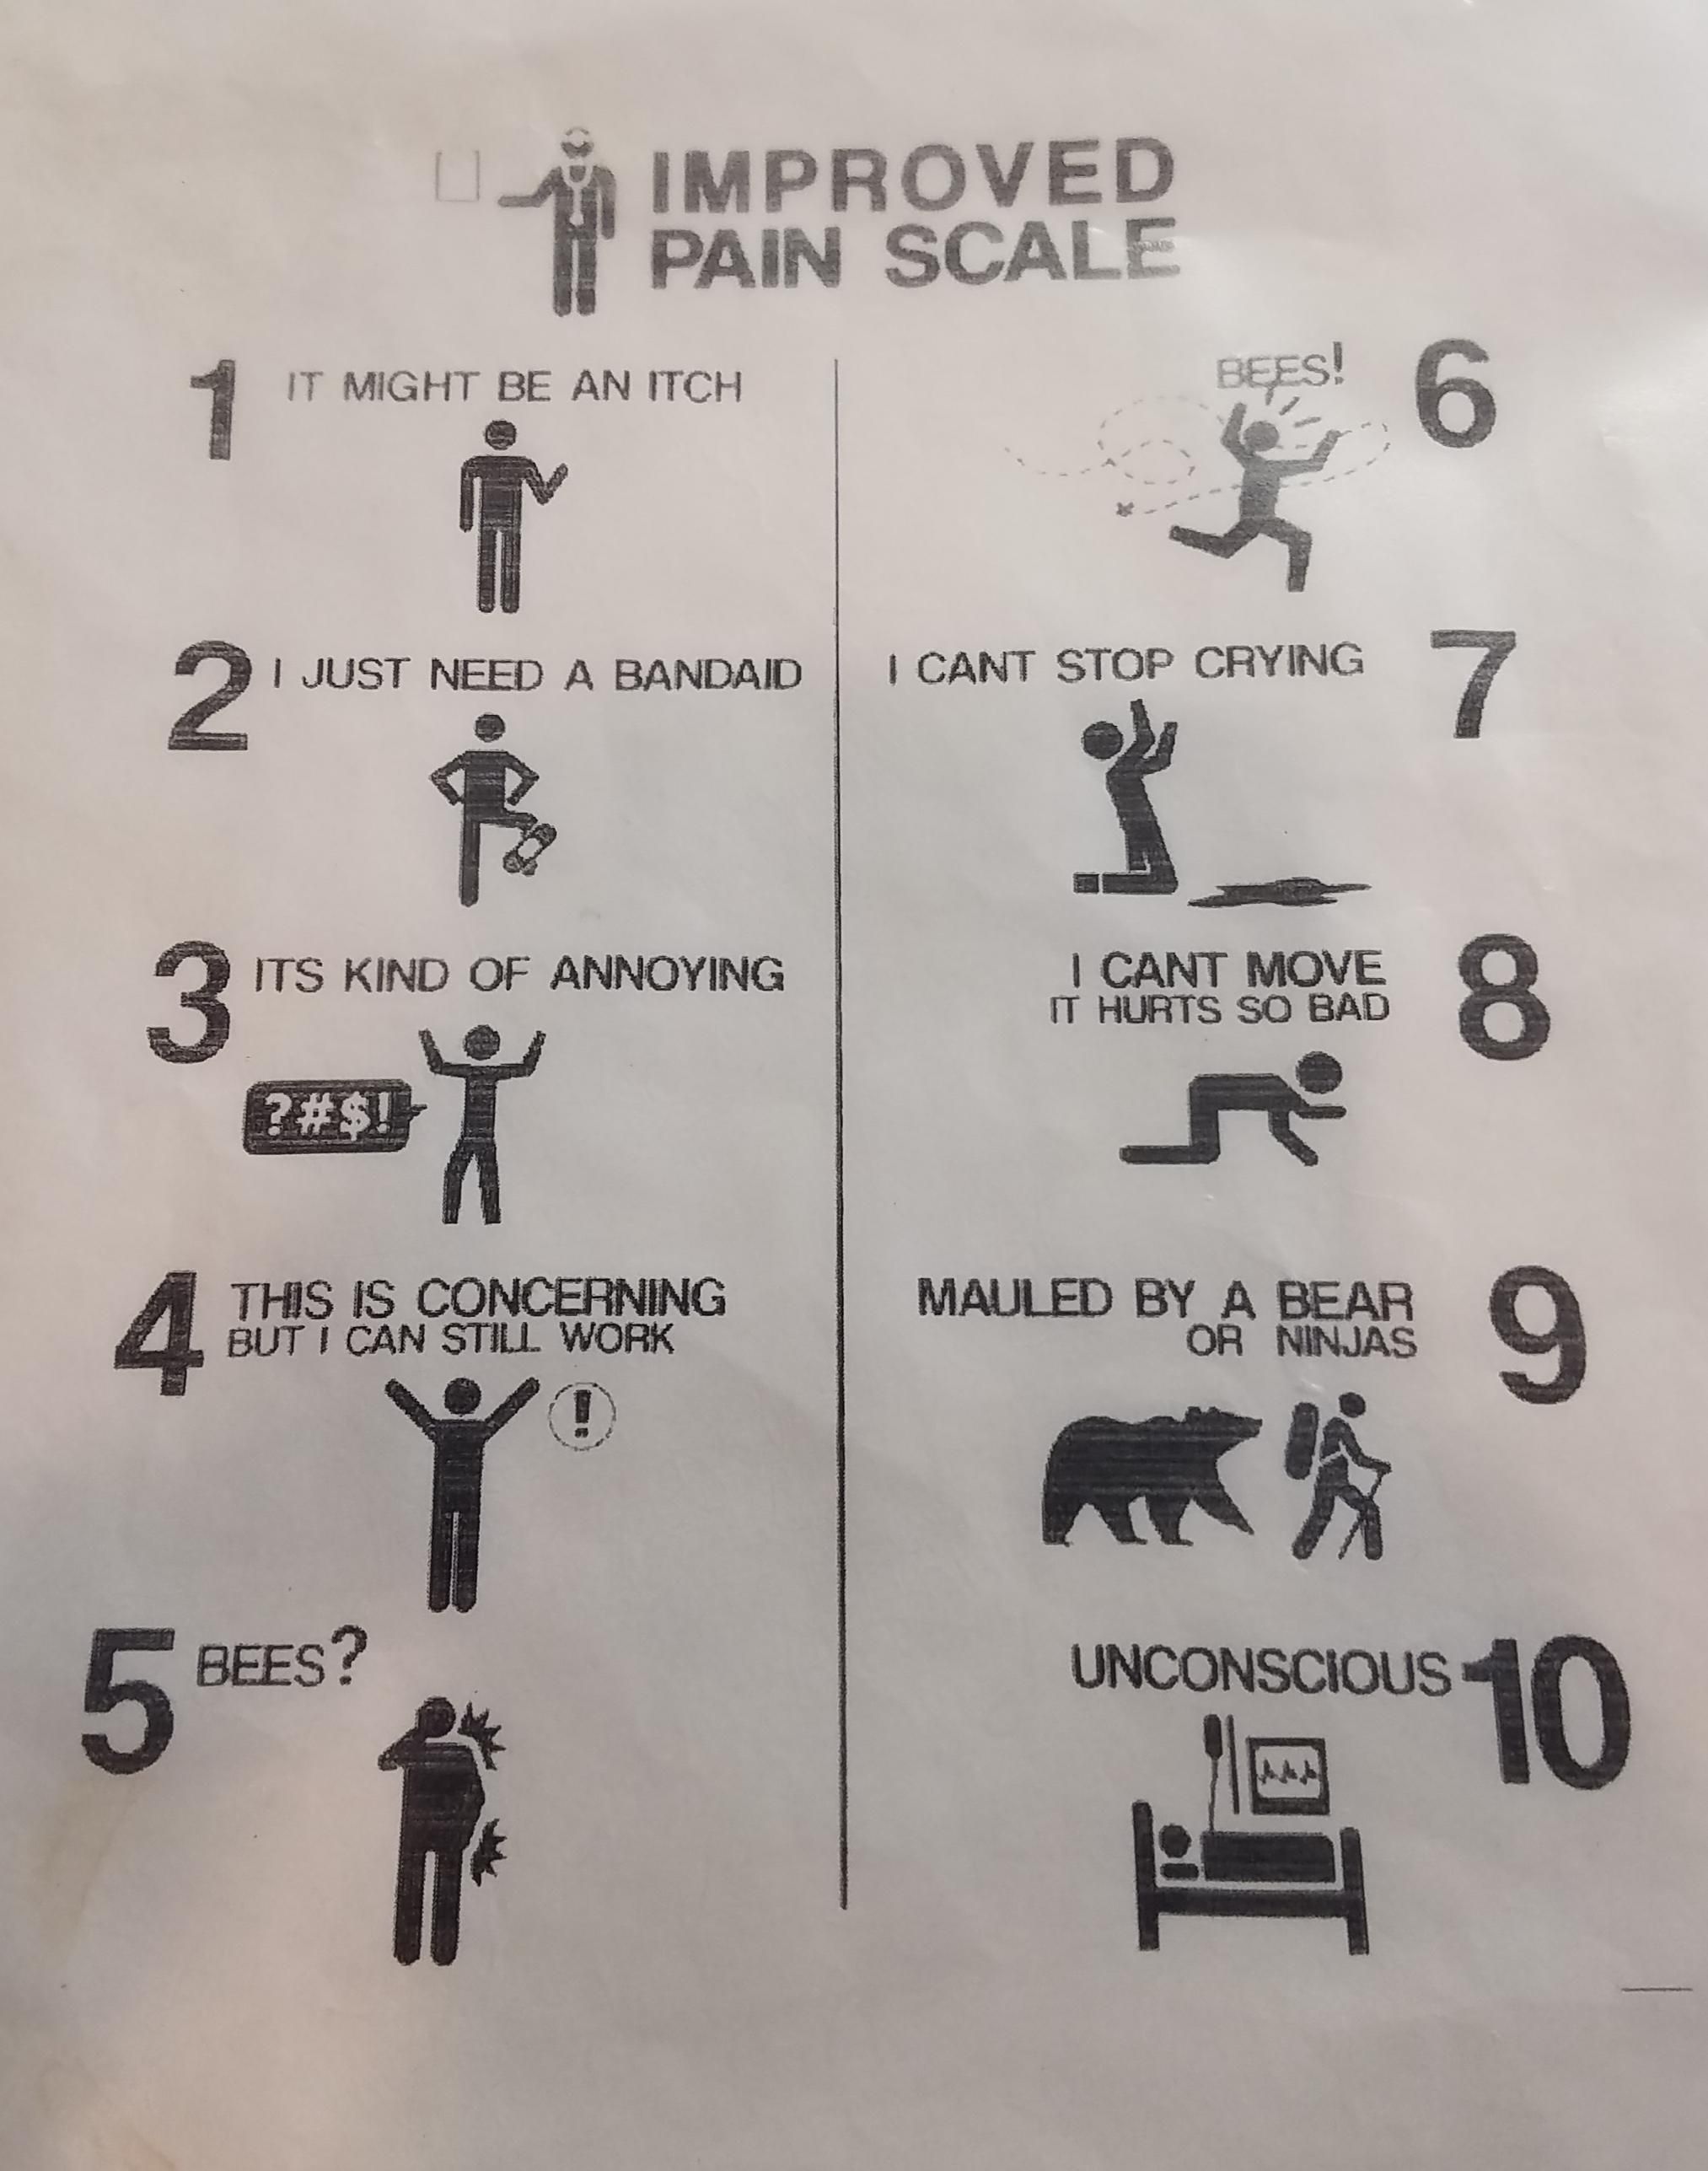 The "Improved Pain Scale" at my chiropractors office